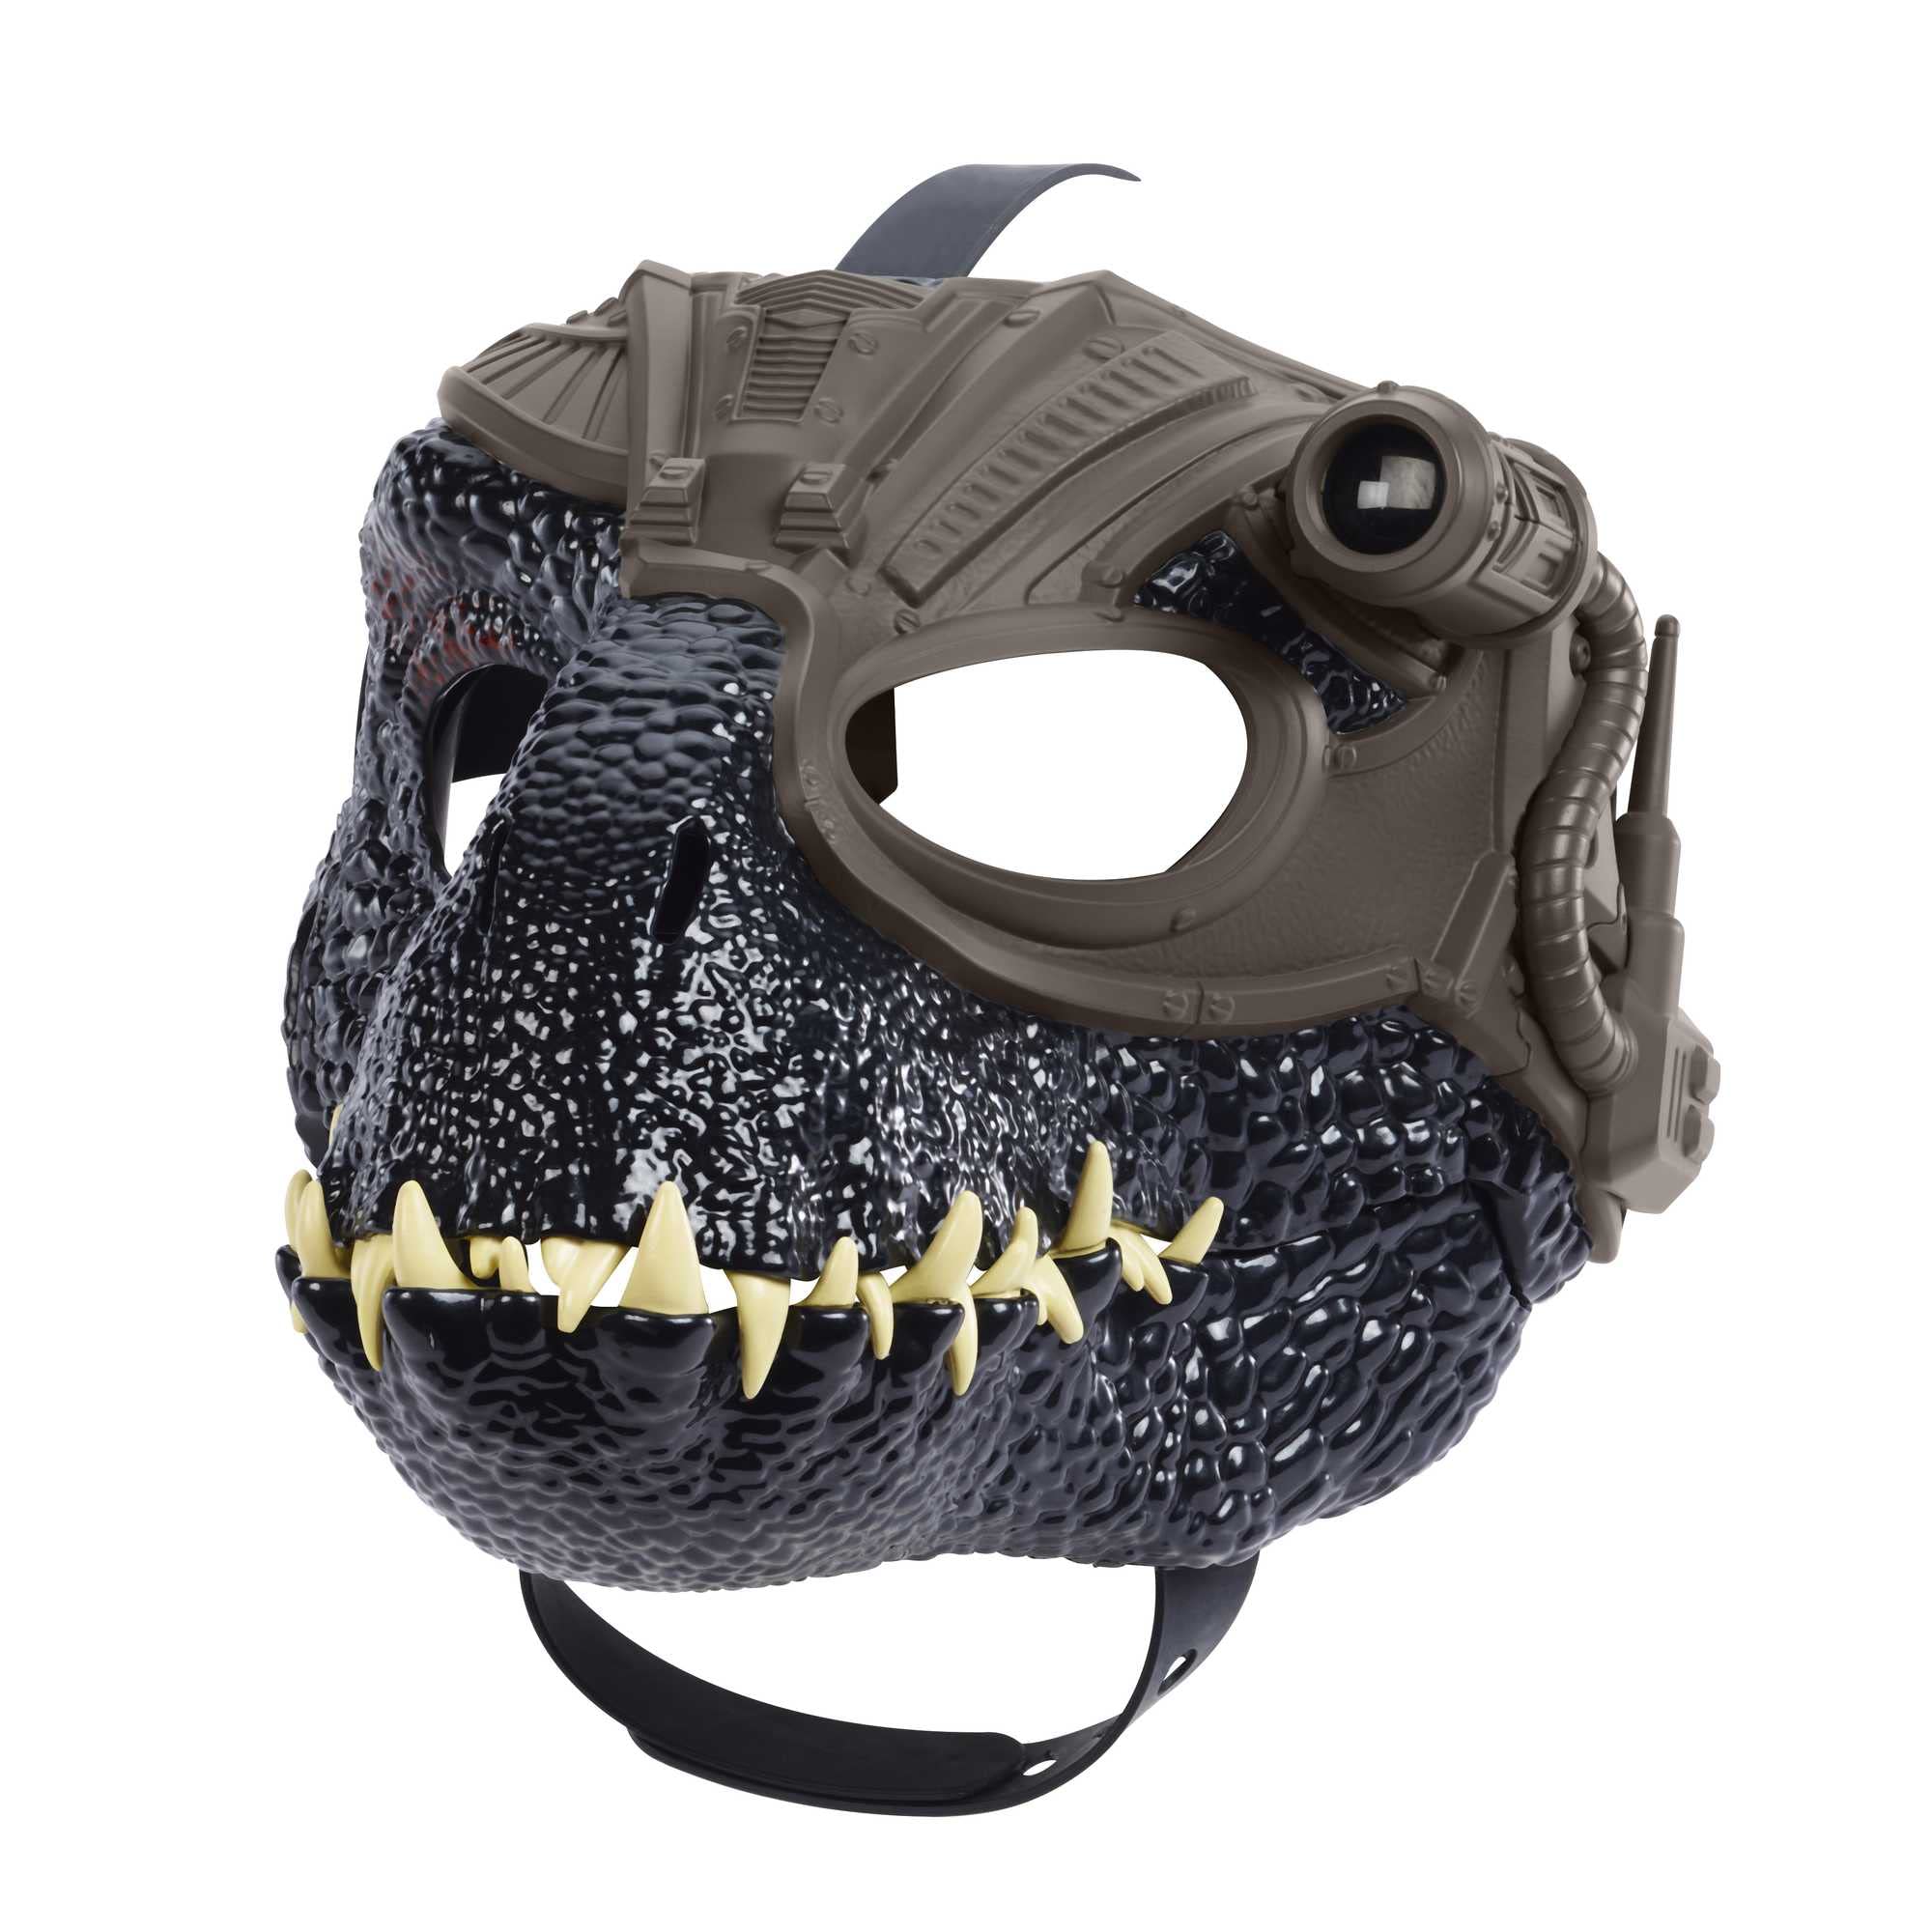 Jurassic World Indoraptor Dinosaur Mask with Tracking Gear, Light and Sound for Costumed Role Play